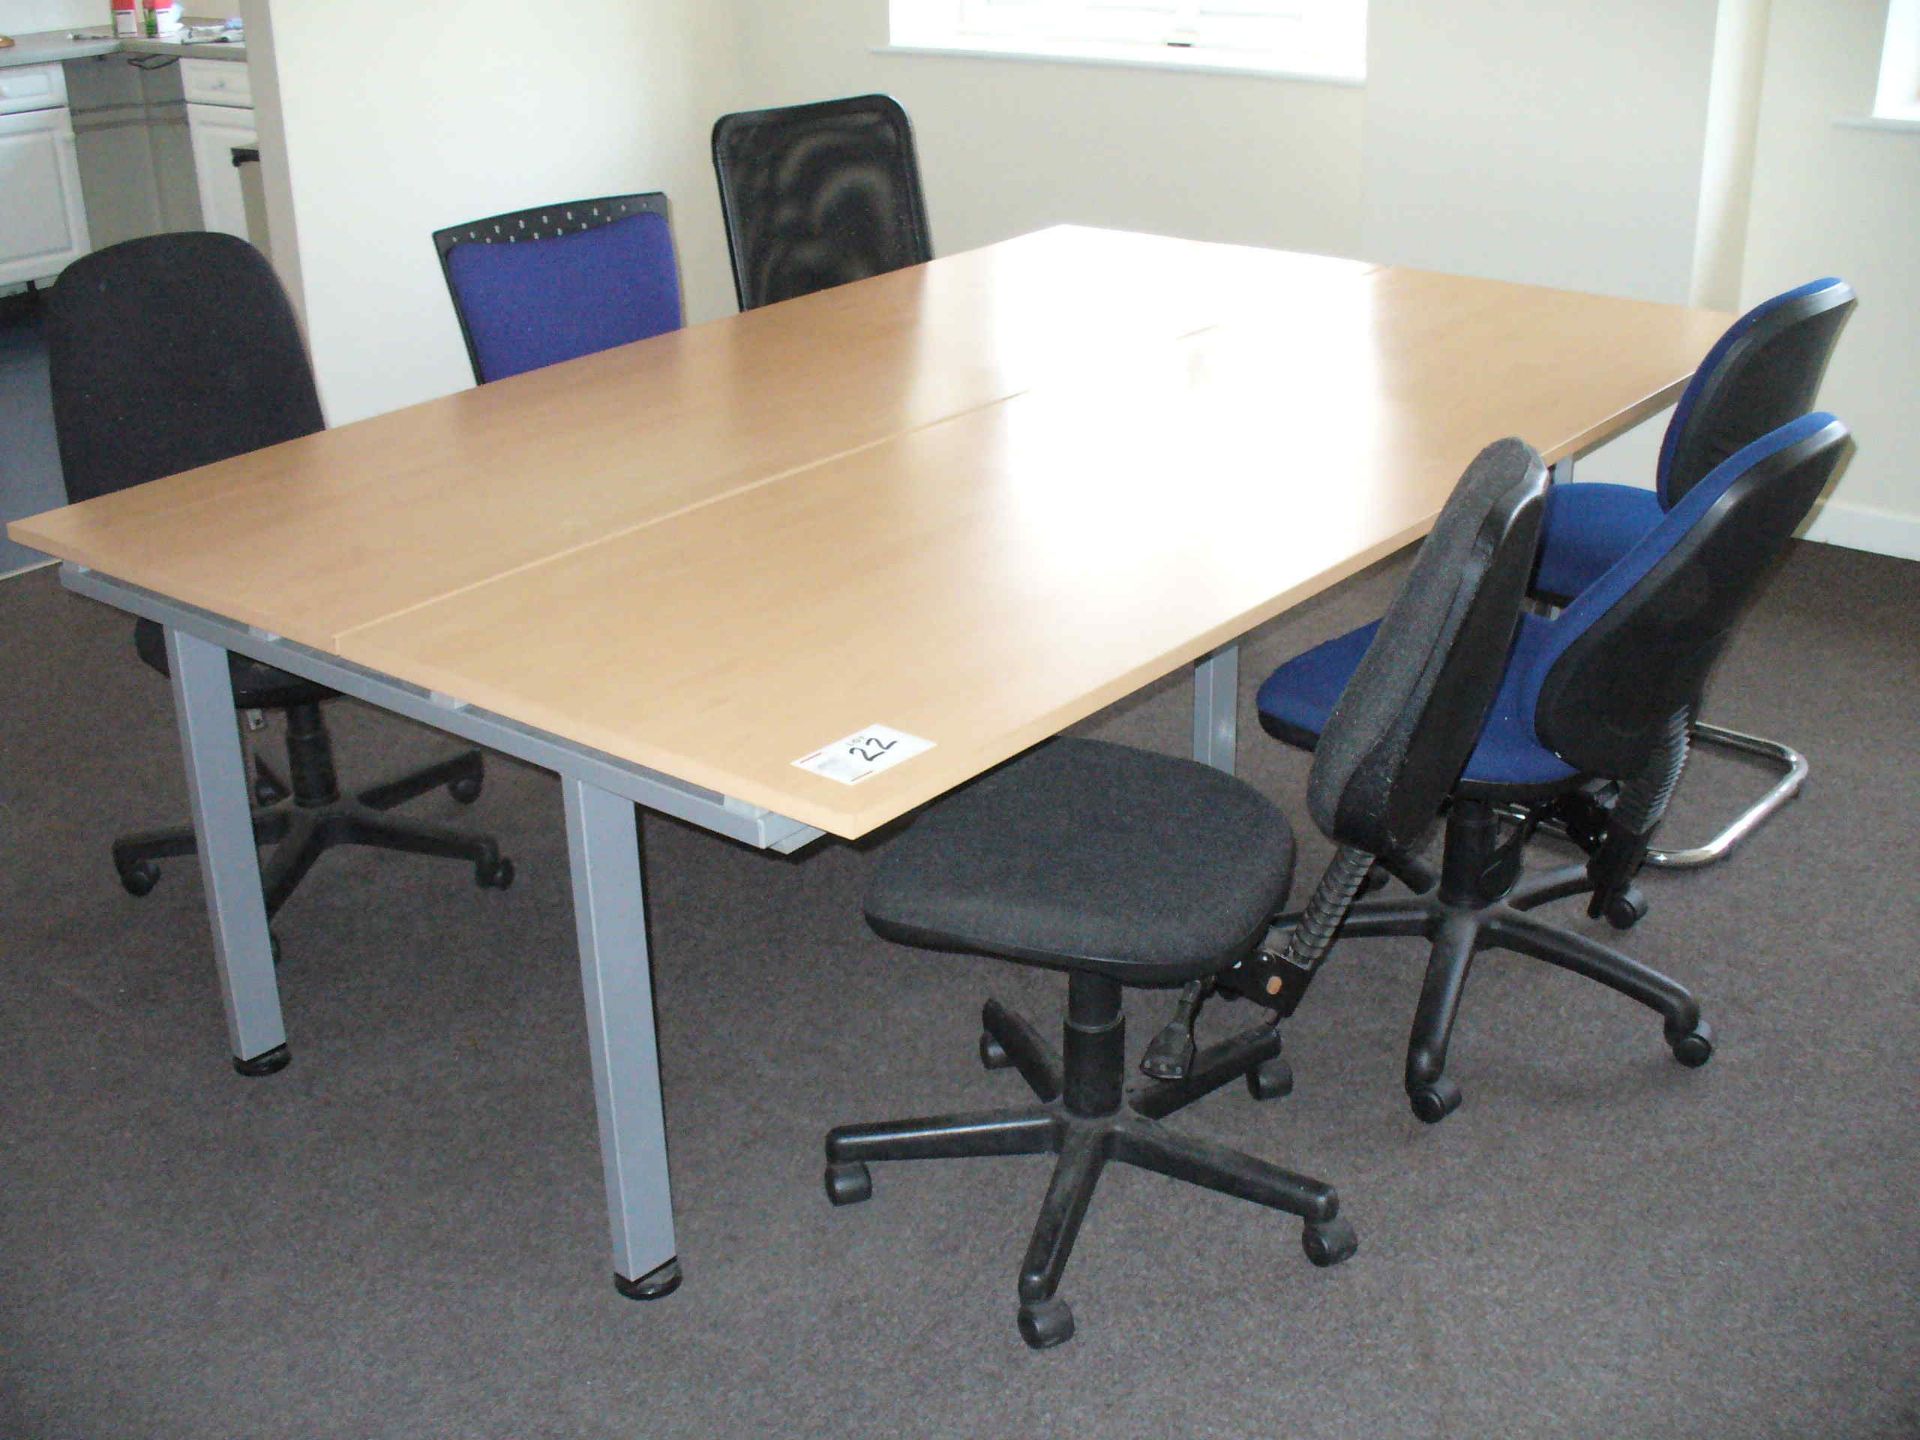 4 station WORK DESK 2.4m long x 1.6m wide with 6 various Chairs.